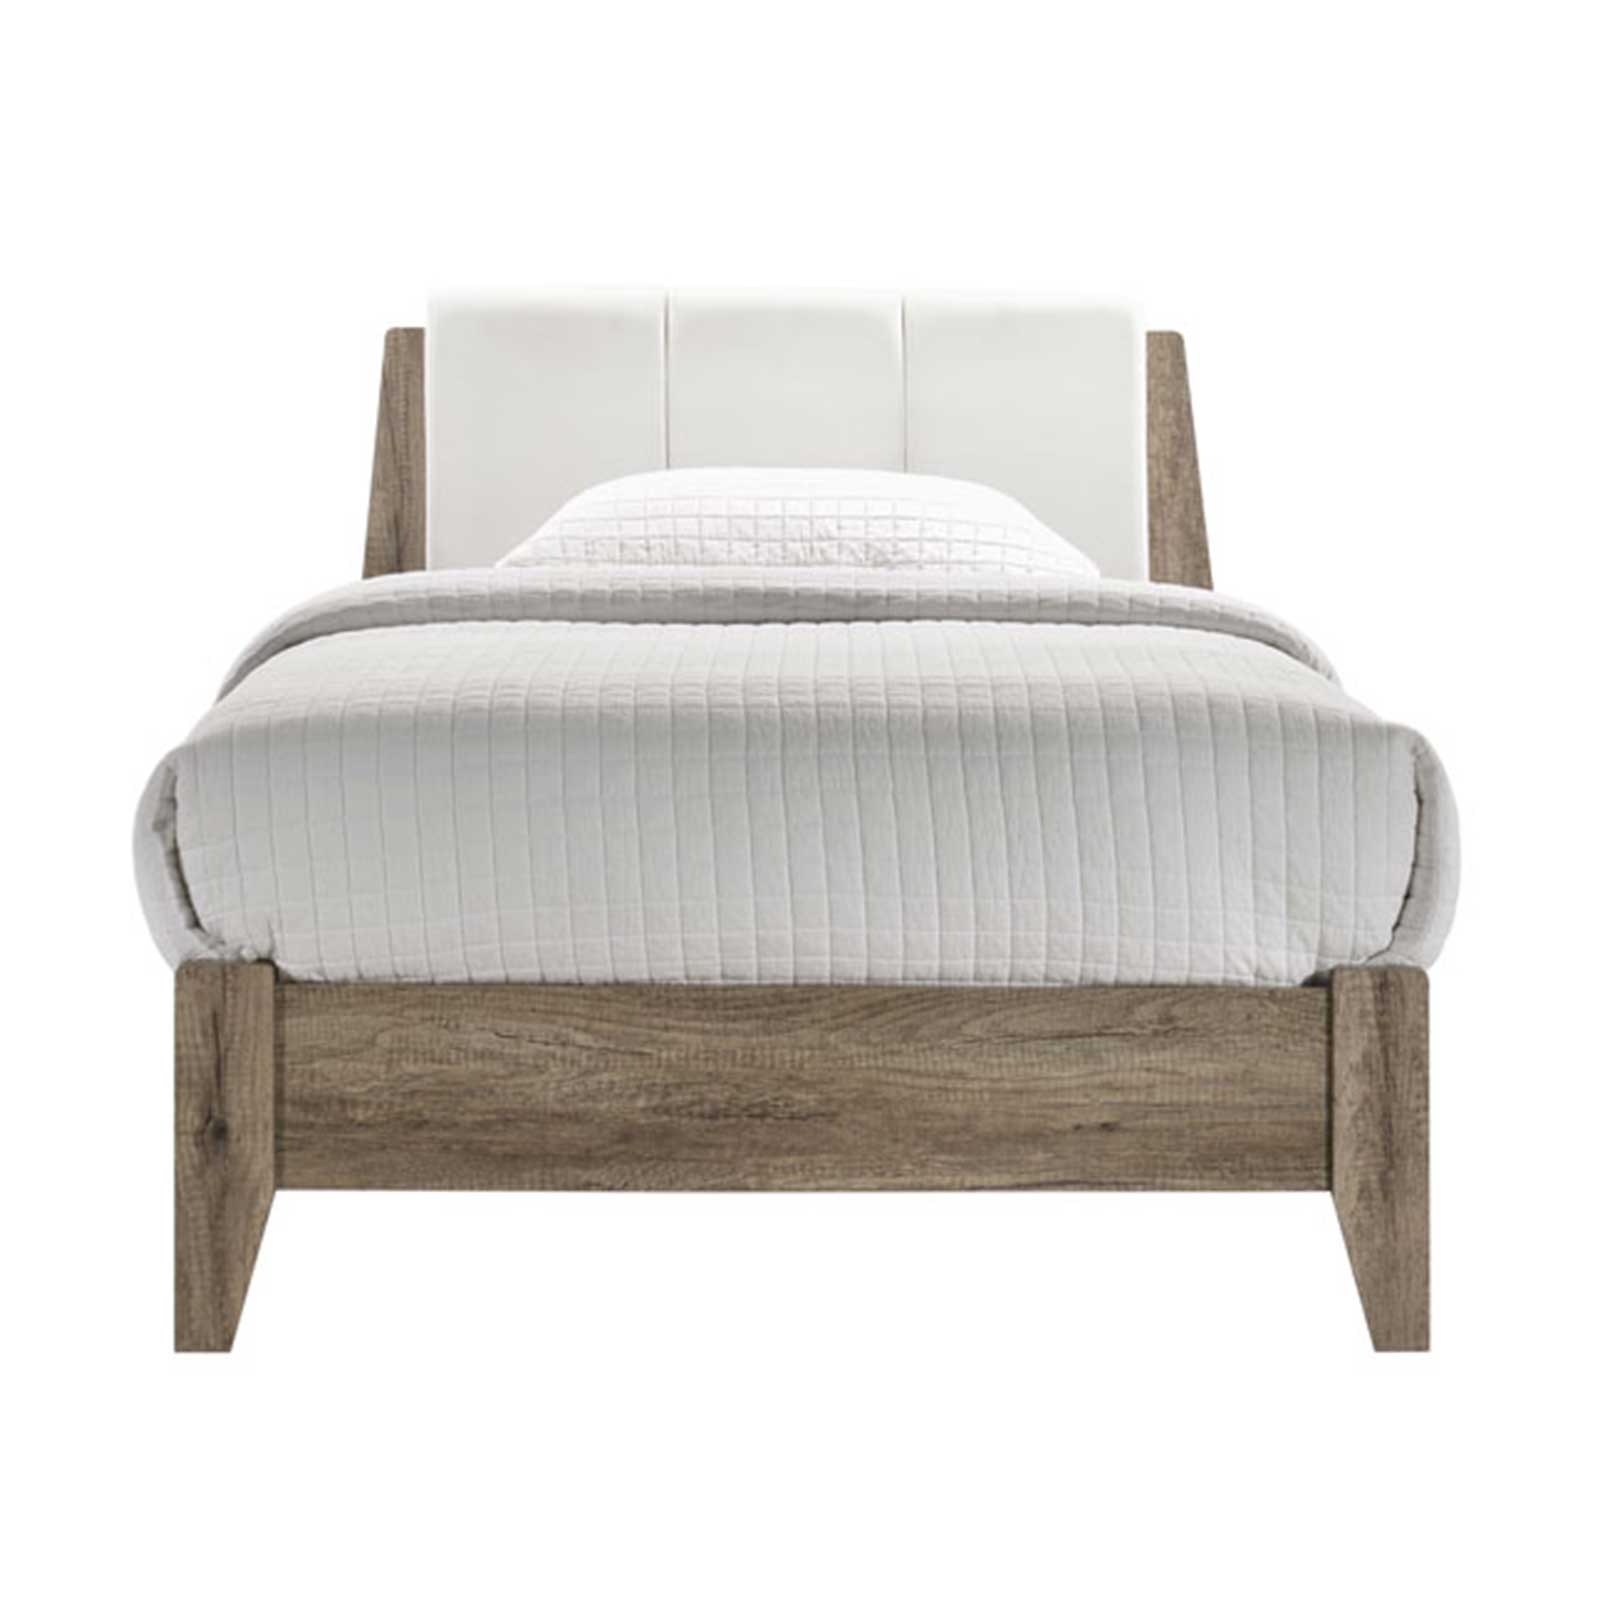 Nobu Wooden Bed Frame Australia, Wood And Leather Queen Bed Frame